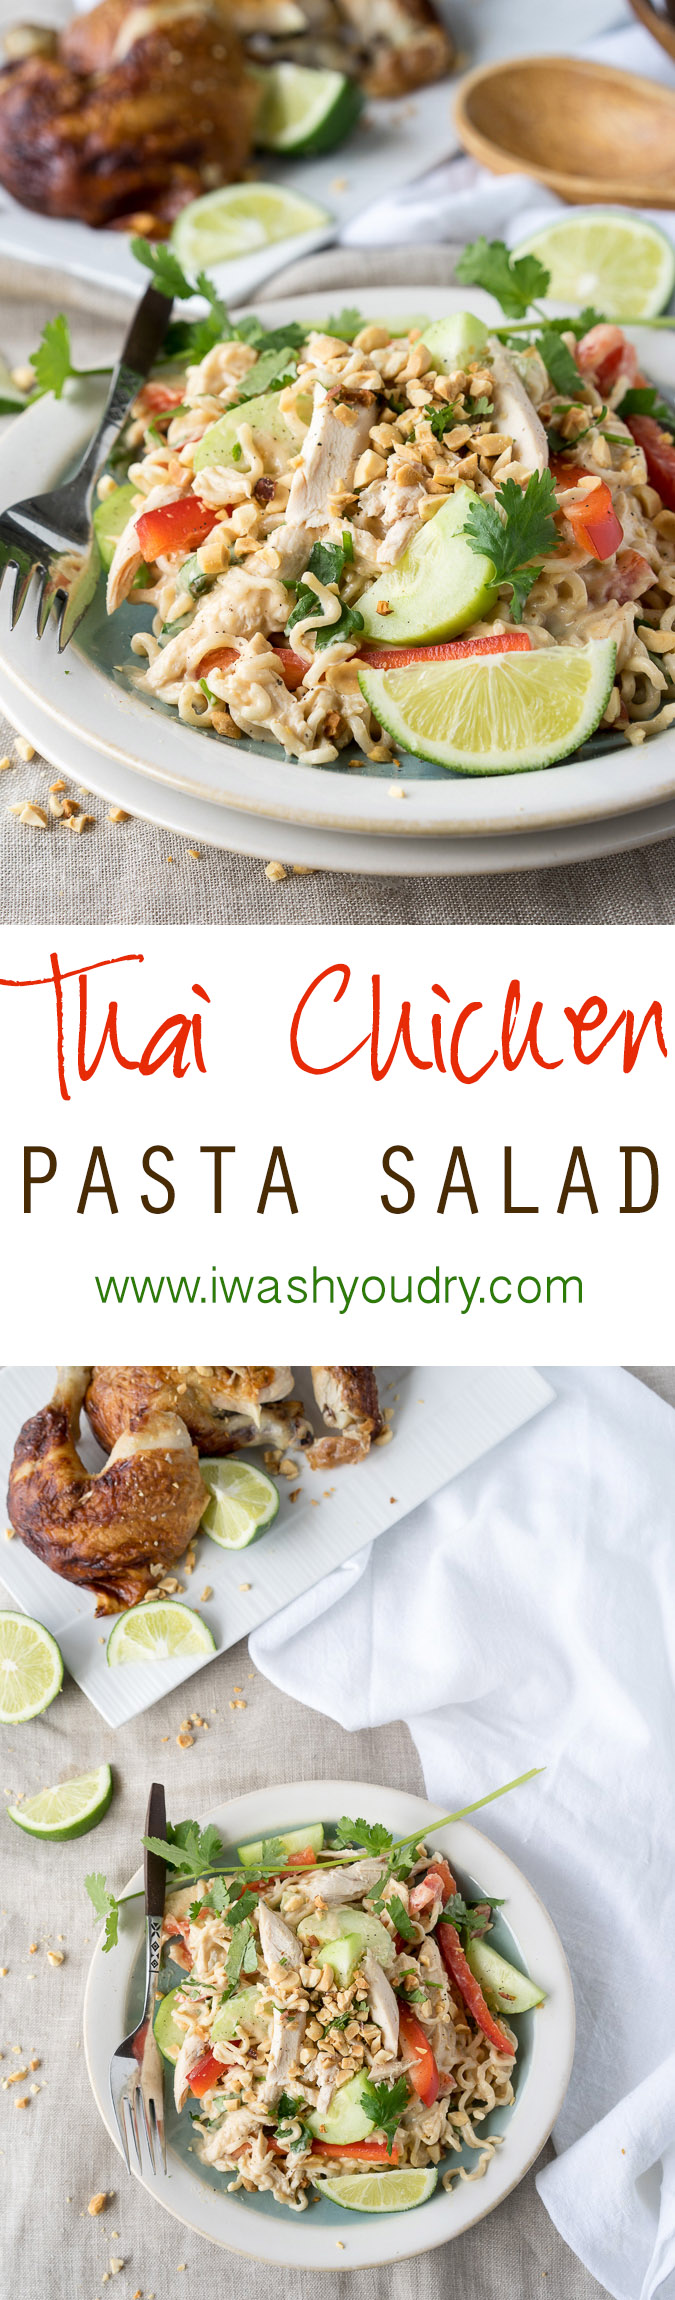 This Thai Chicken Pasta Salad is cool, creamy, and perfect for summer BBQ's!